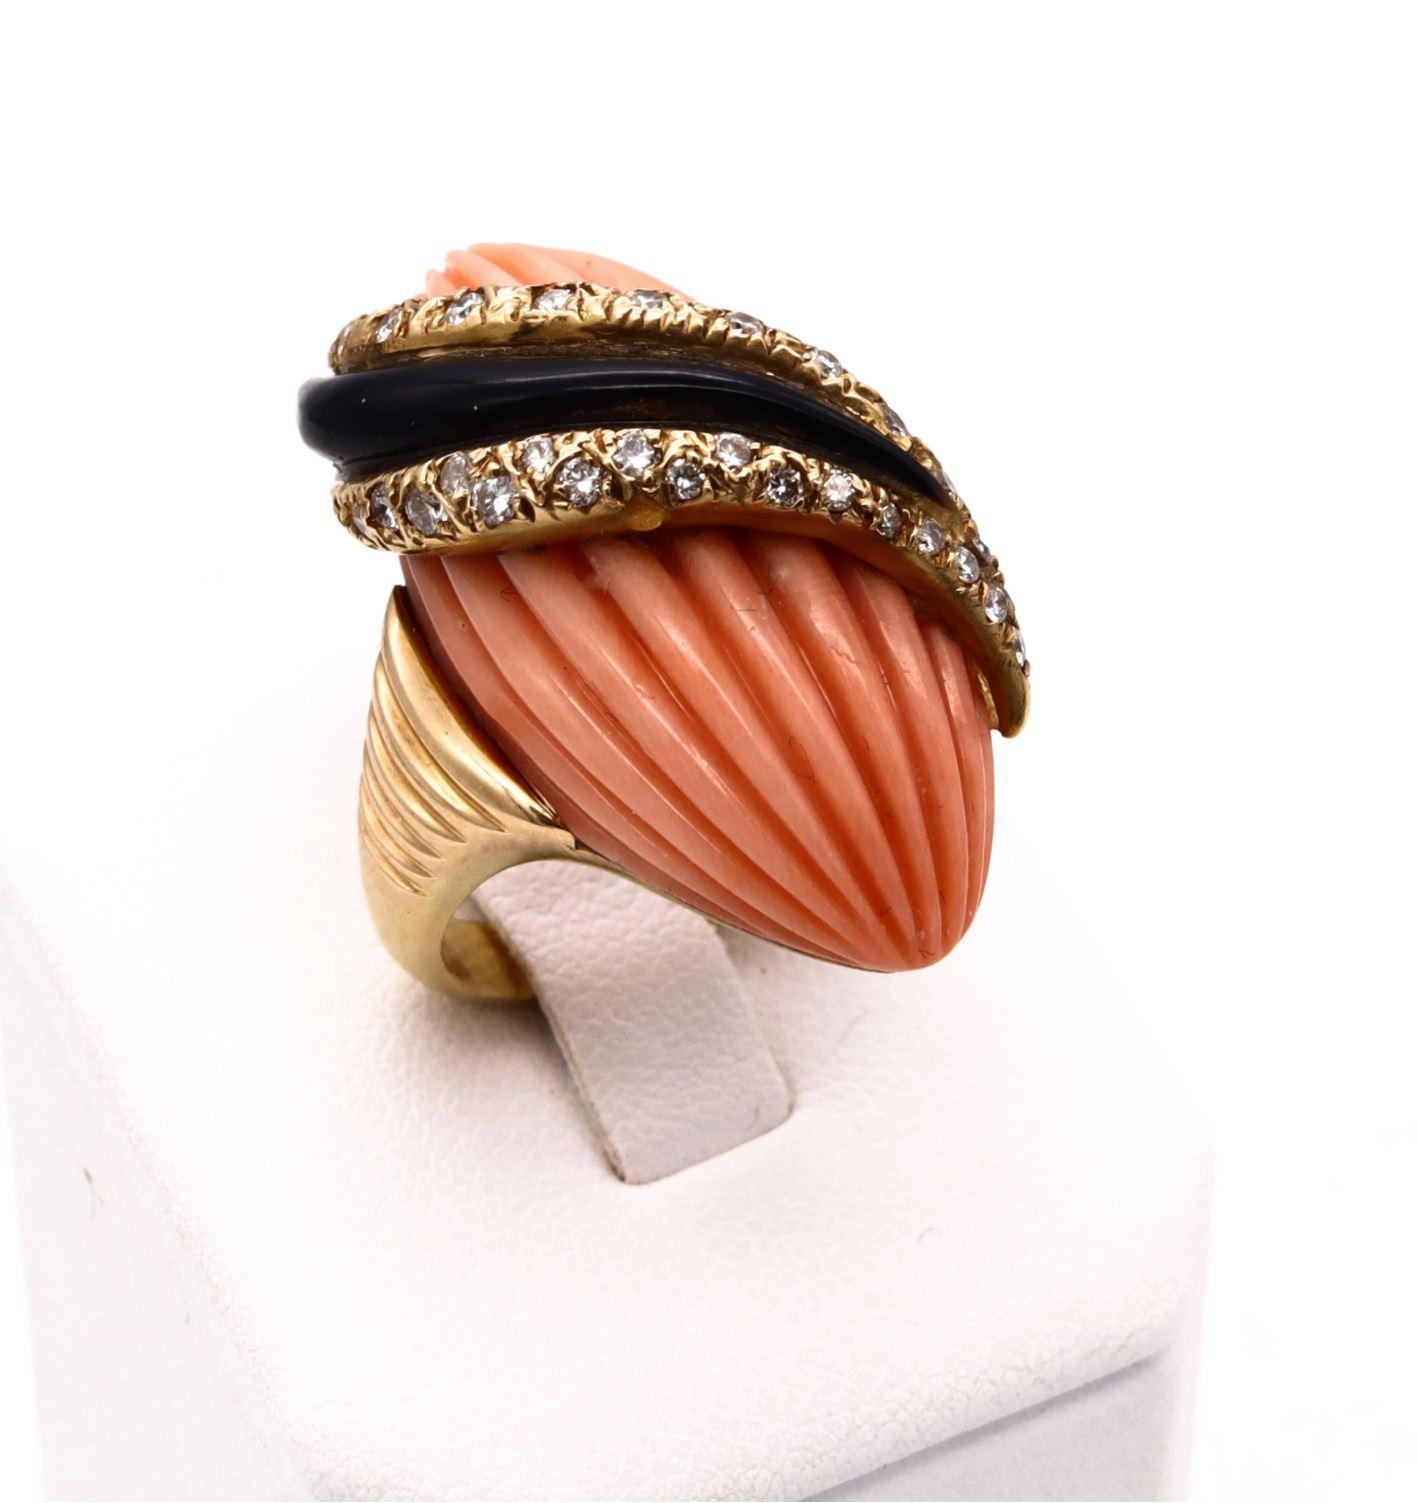 A cocktail ring designed by Andre Vassort.

Beautiful French piece created around the 1960's at the Vassort atelier in Paris. It was carefully crafted in solid 18 karats yellow gold with high polished finish.

Embellished with an almond fluted